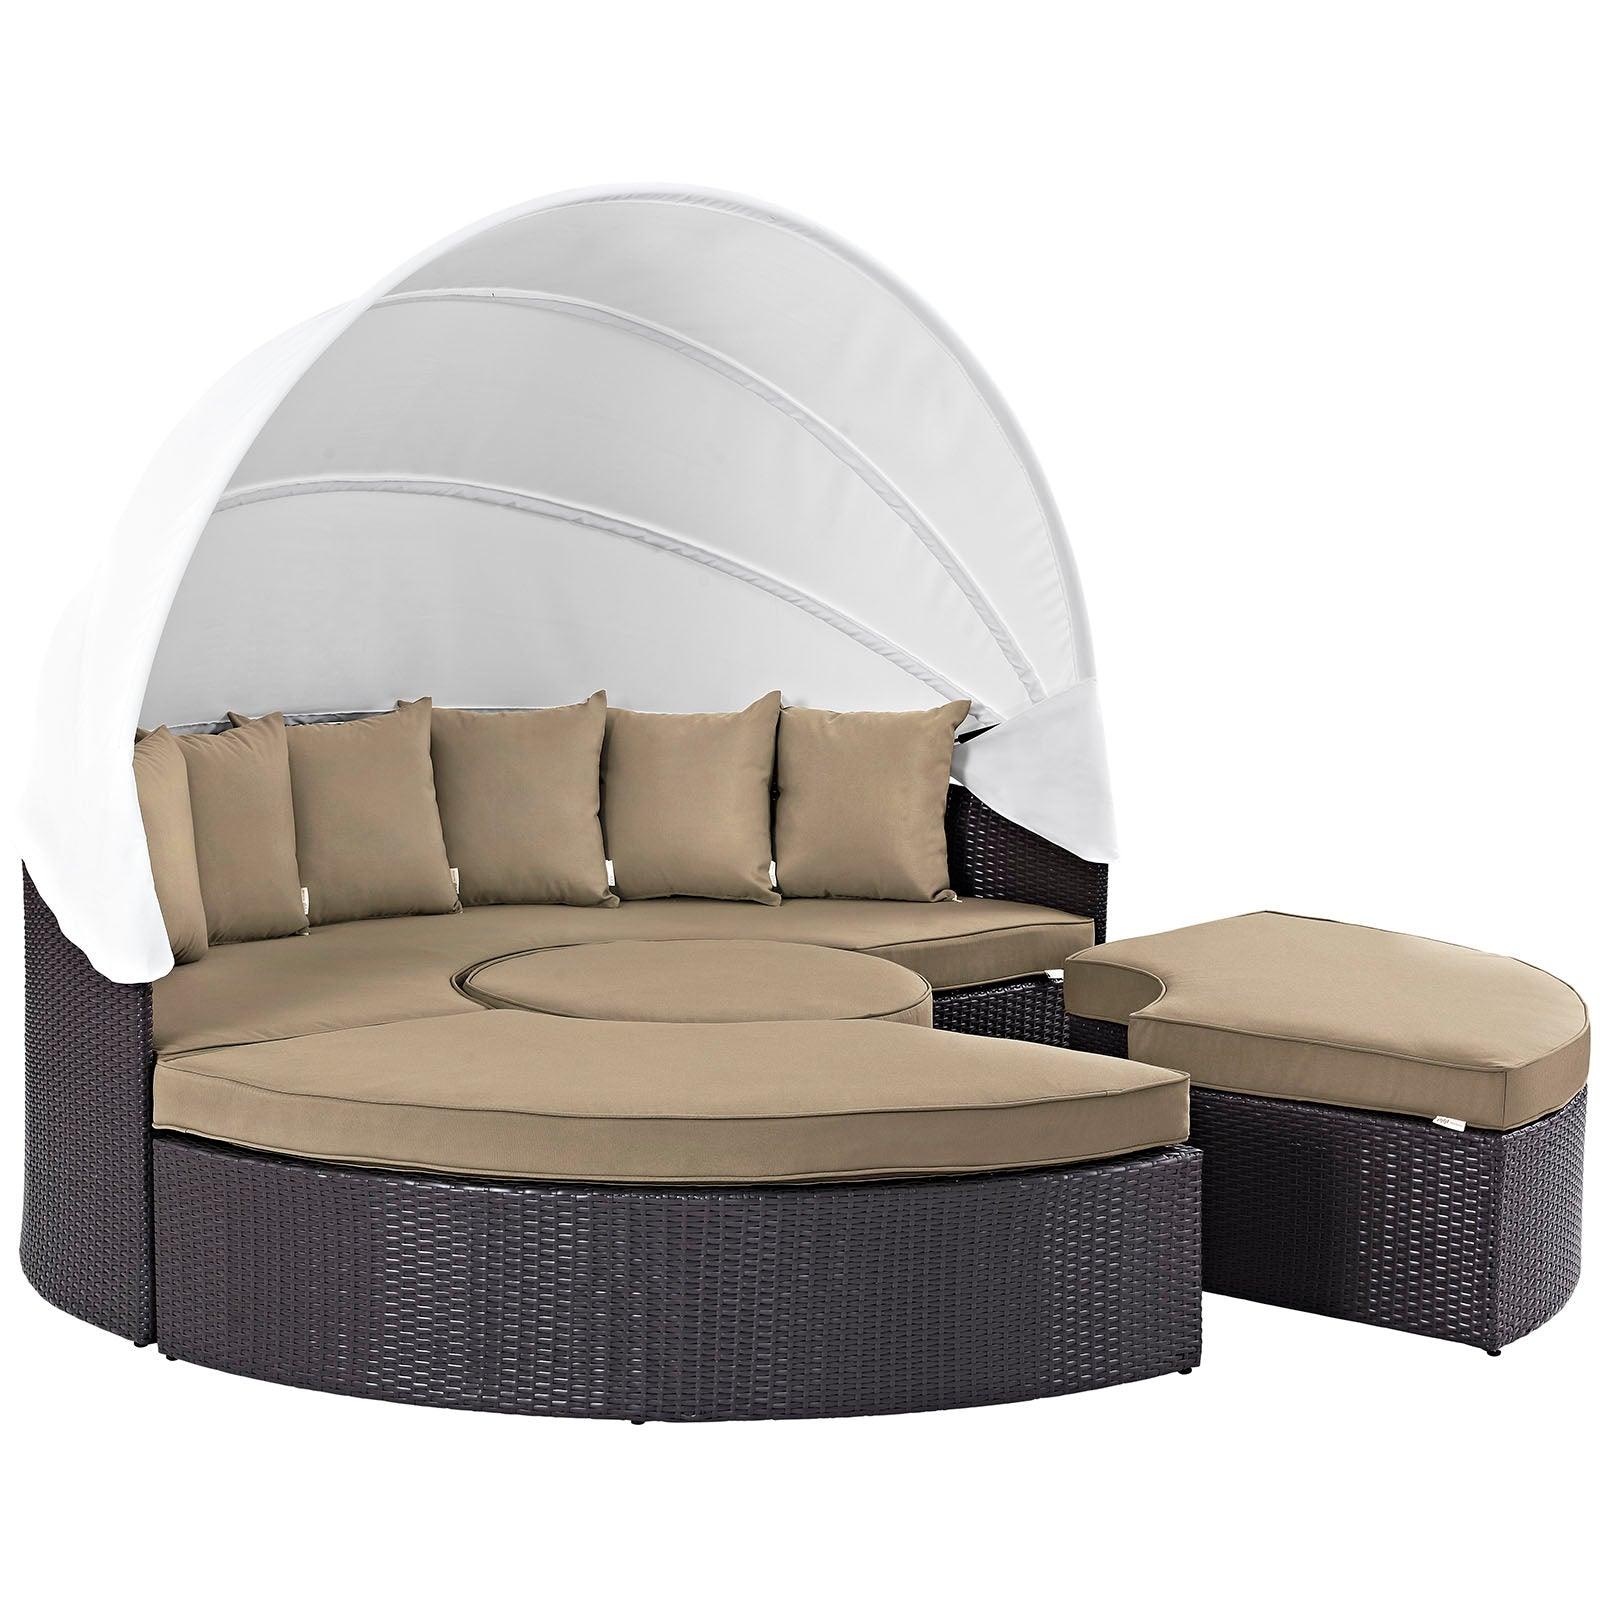 Modway Convene Canopy Outdoor Patio Daybed FredCo